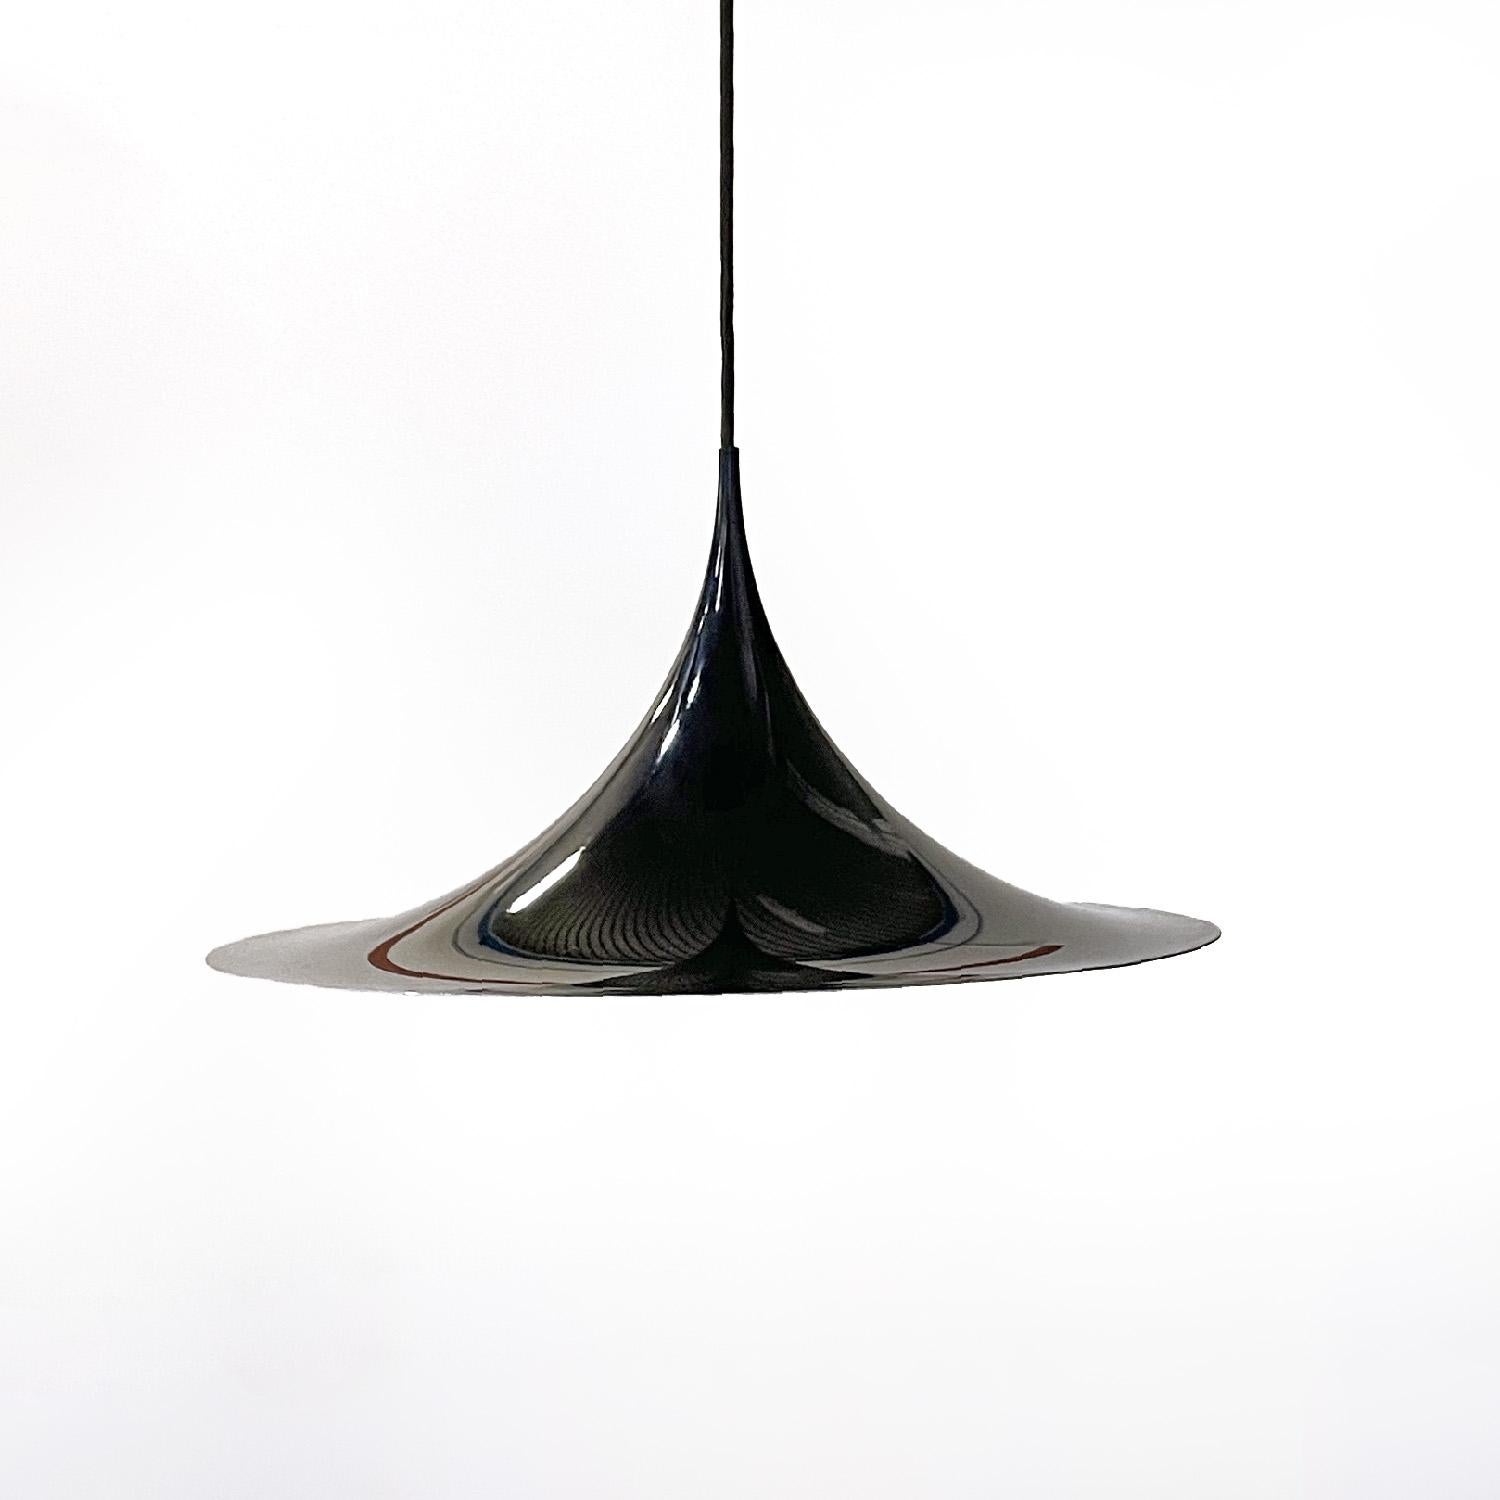 Scandinavian mid-century modern black chandelier Semi by Fog & Mørup, 1960
Chandelier mod. Semi with round base lampshade in shiny white enamelled metal on the inside and shiny black on the outside. The cable and the ceiling connection are also in